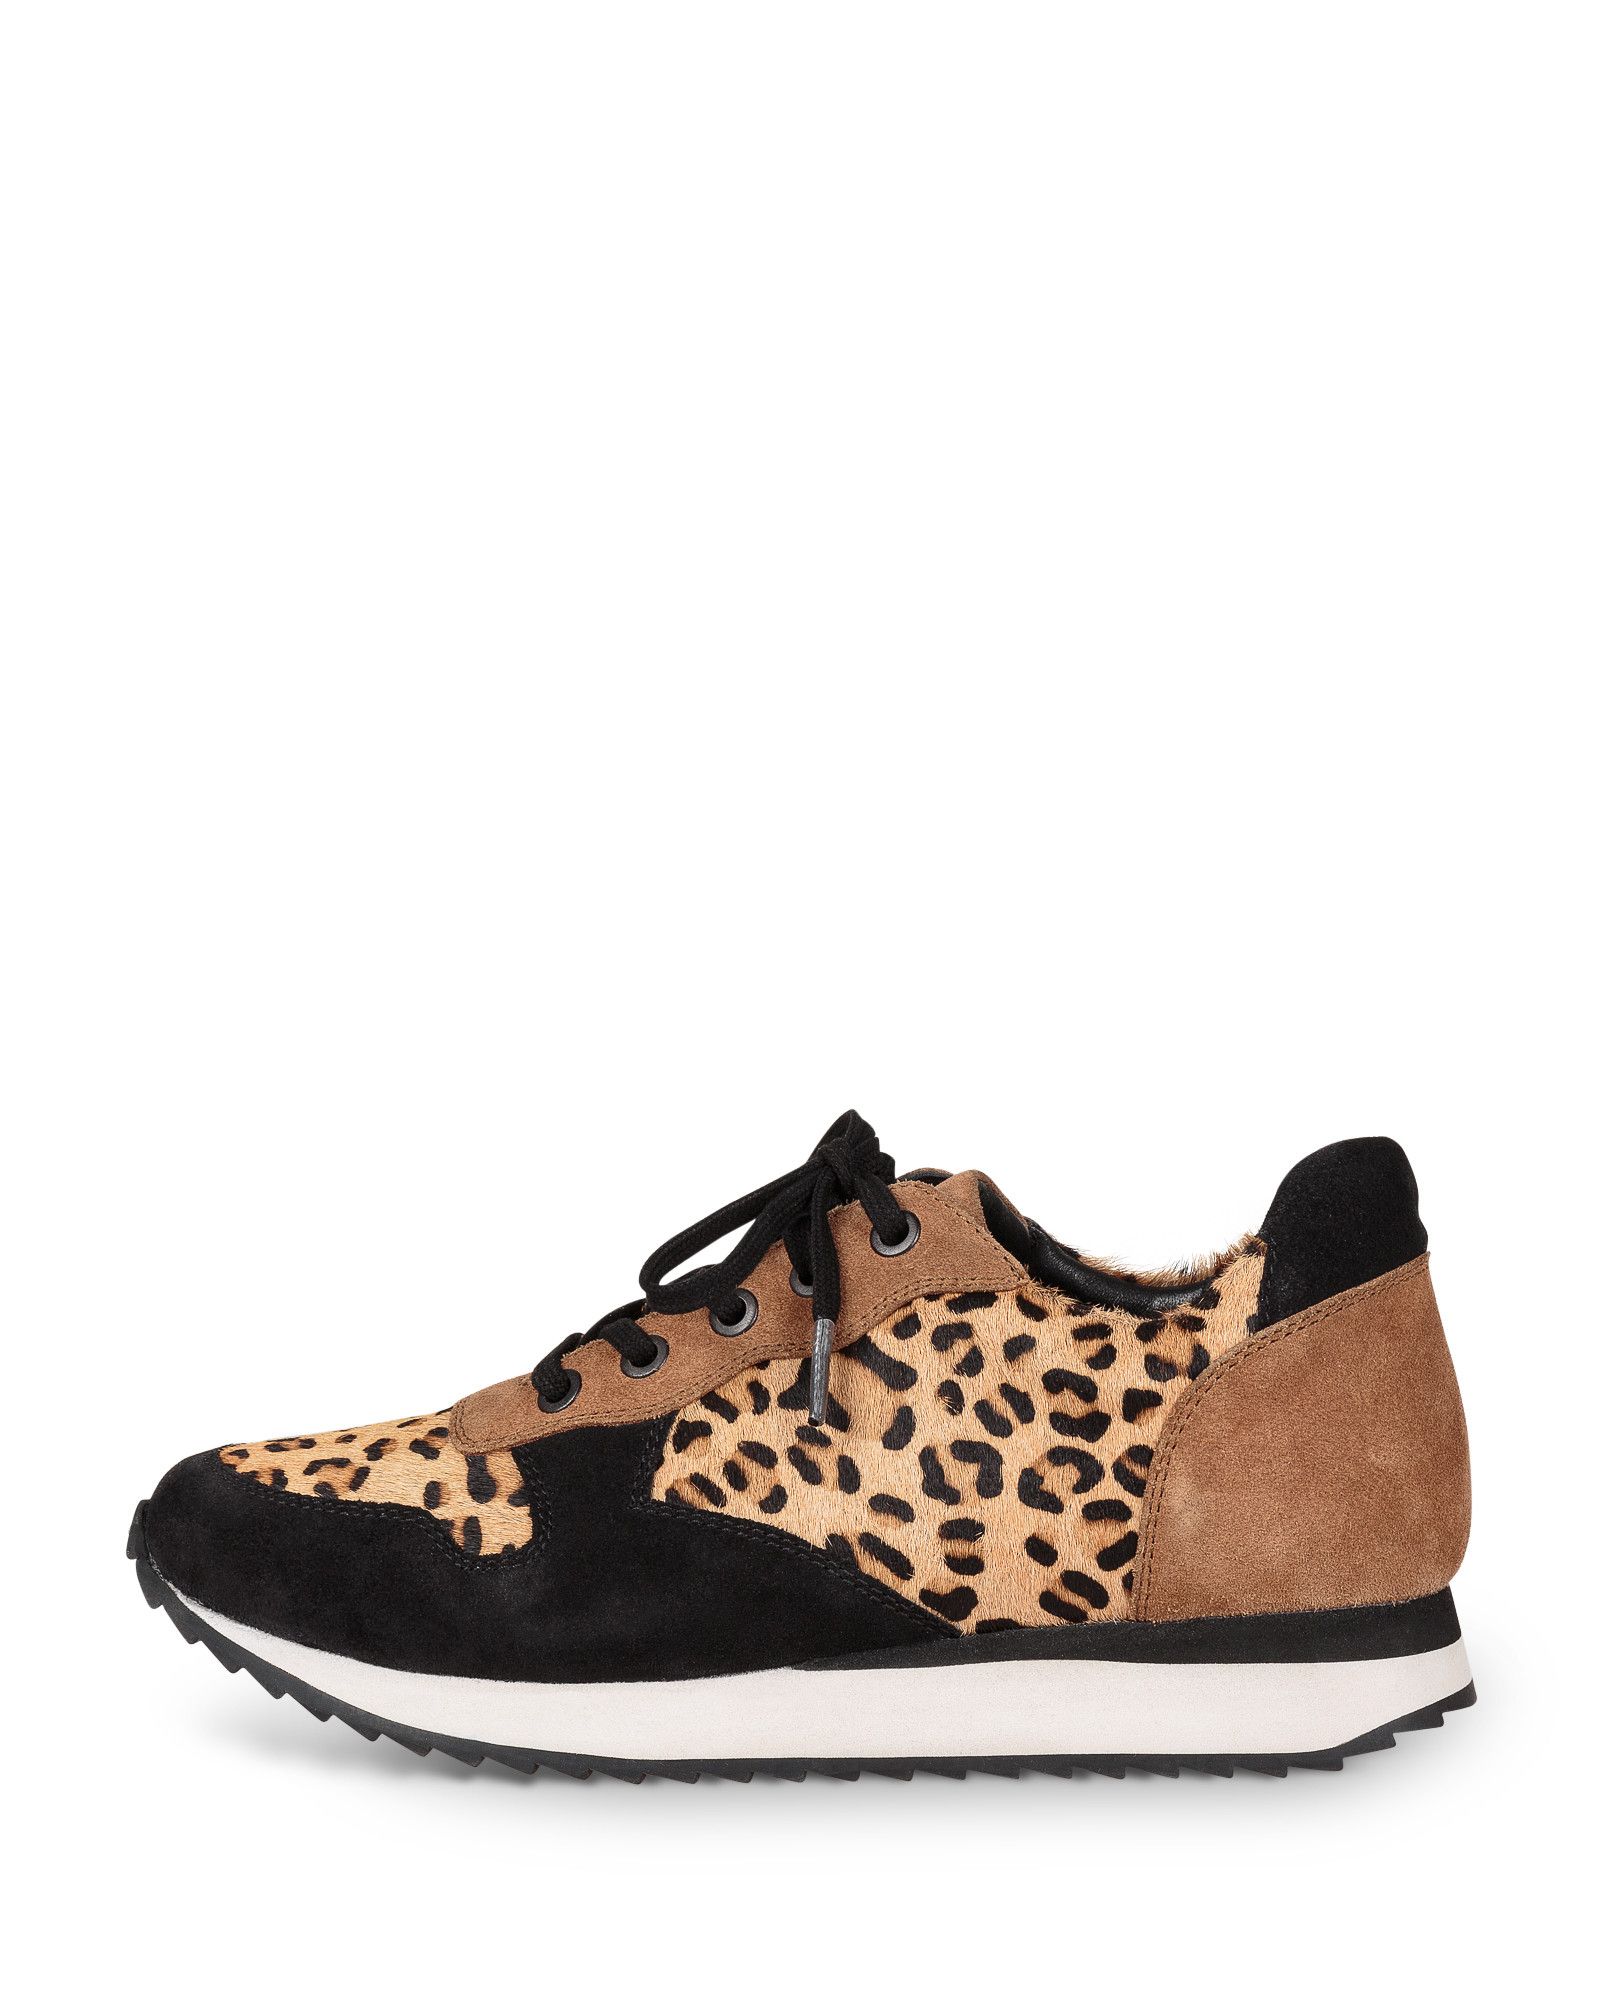 black and animal print trainers